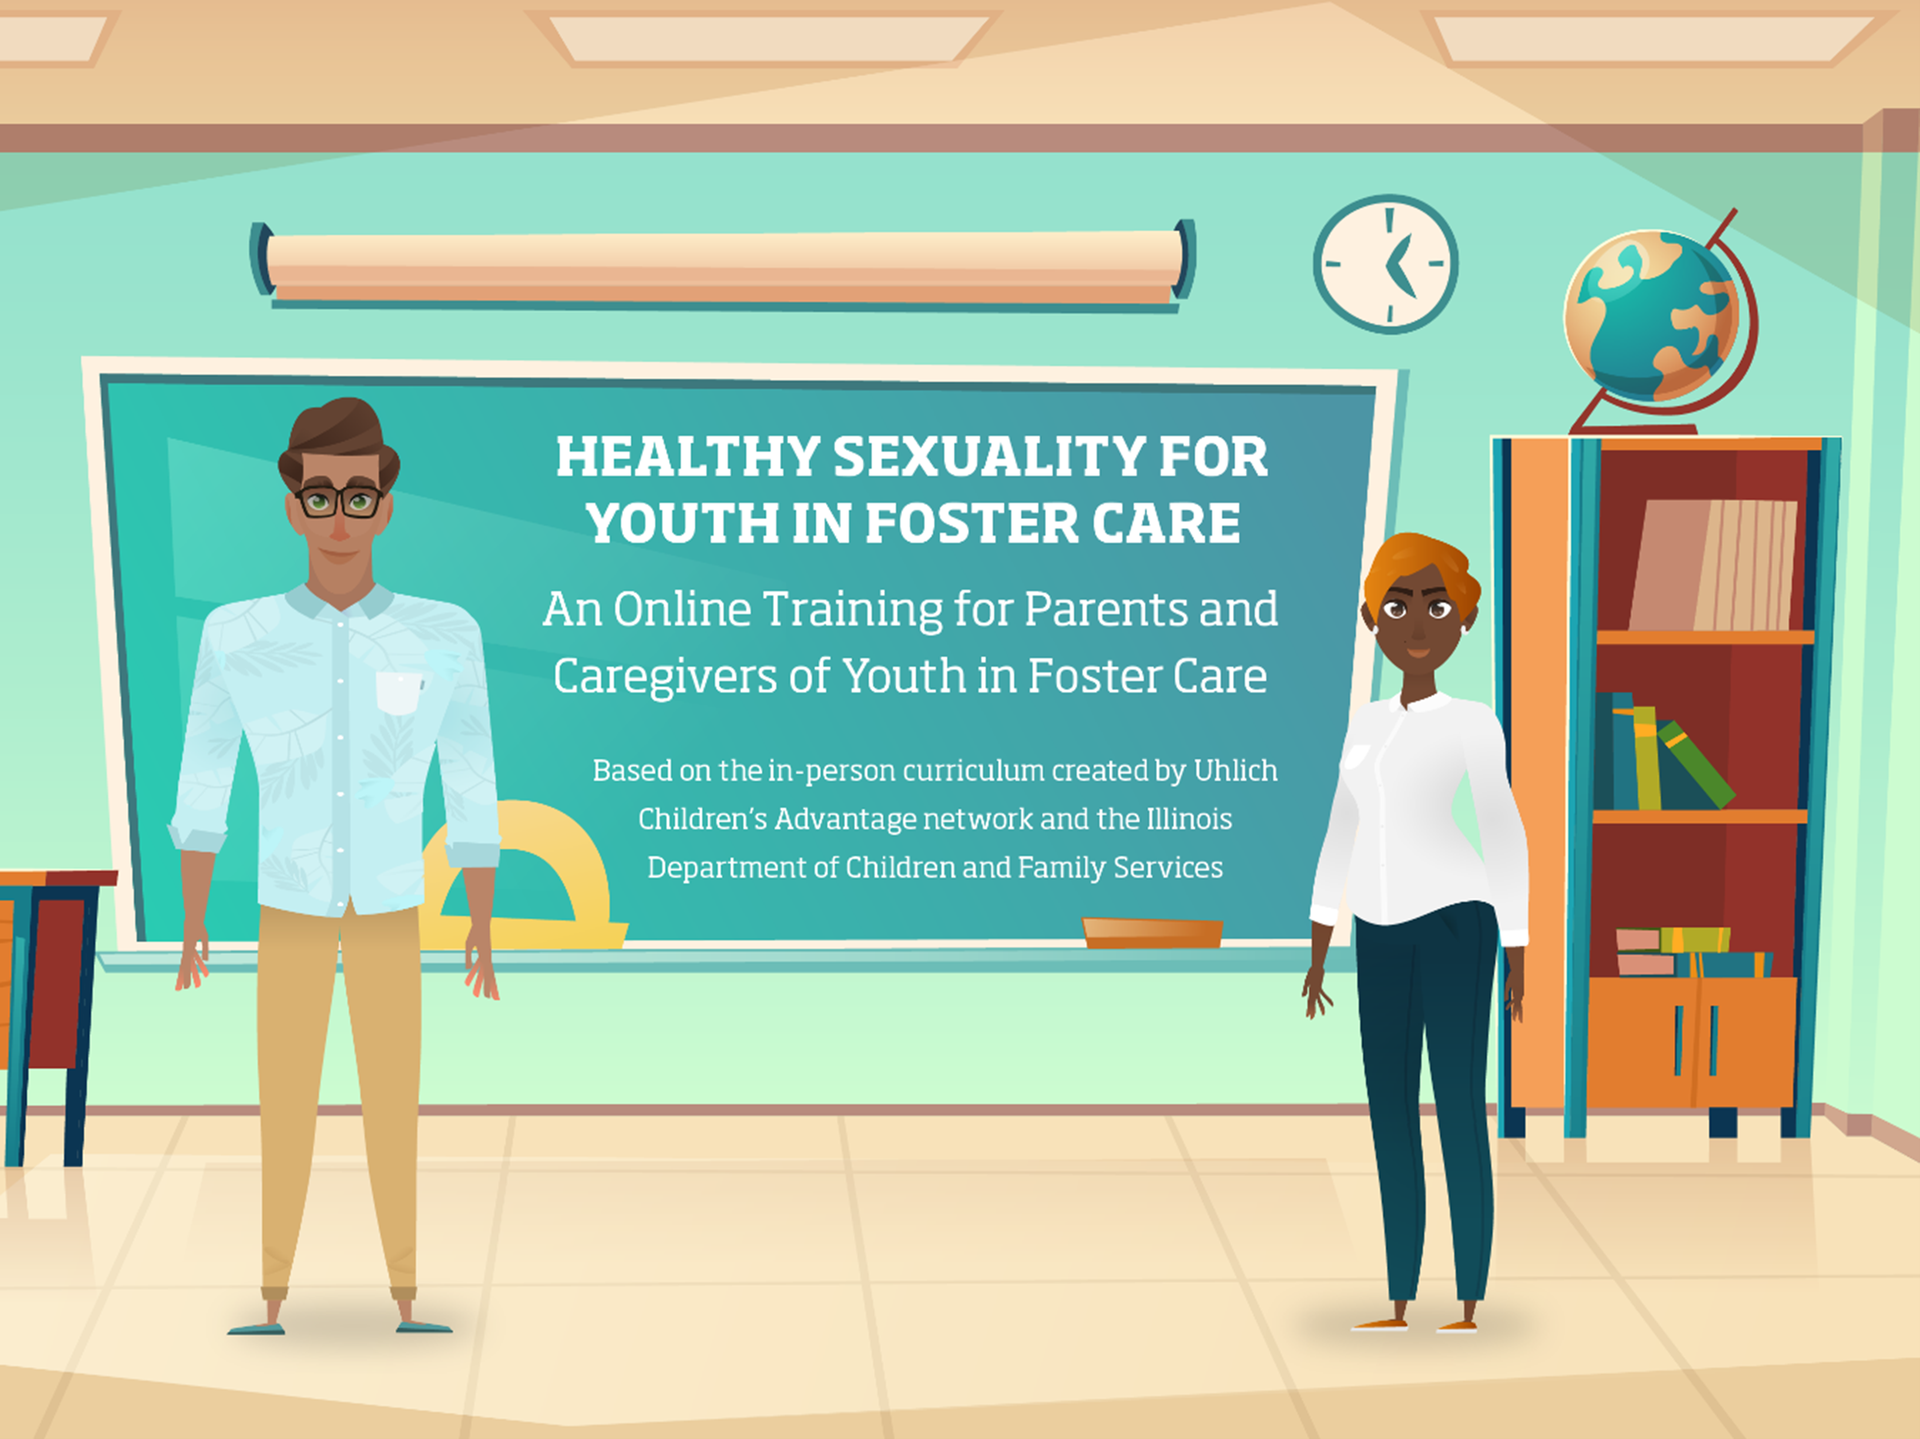 Image from the course in which two trainer avatars stand in a virtual classroom in front of a blackboard. The blackboard has the text “Healthy Sexuality for Youth in Foster Care: An Online Training for Parents and Caregivers of Youth in Foster Care.” 